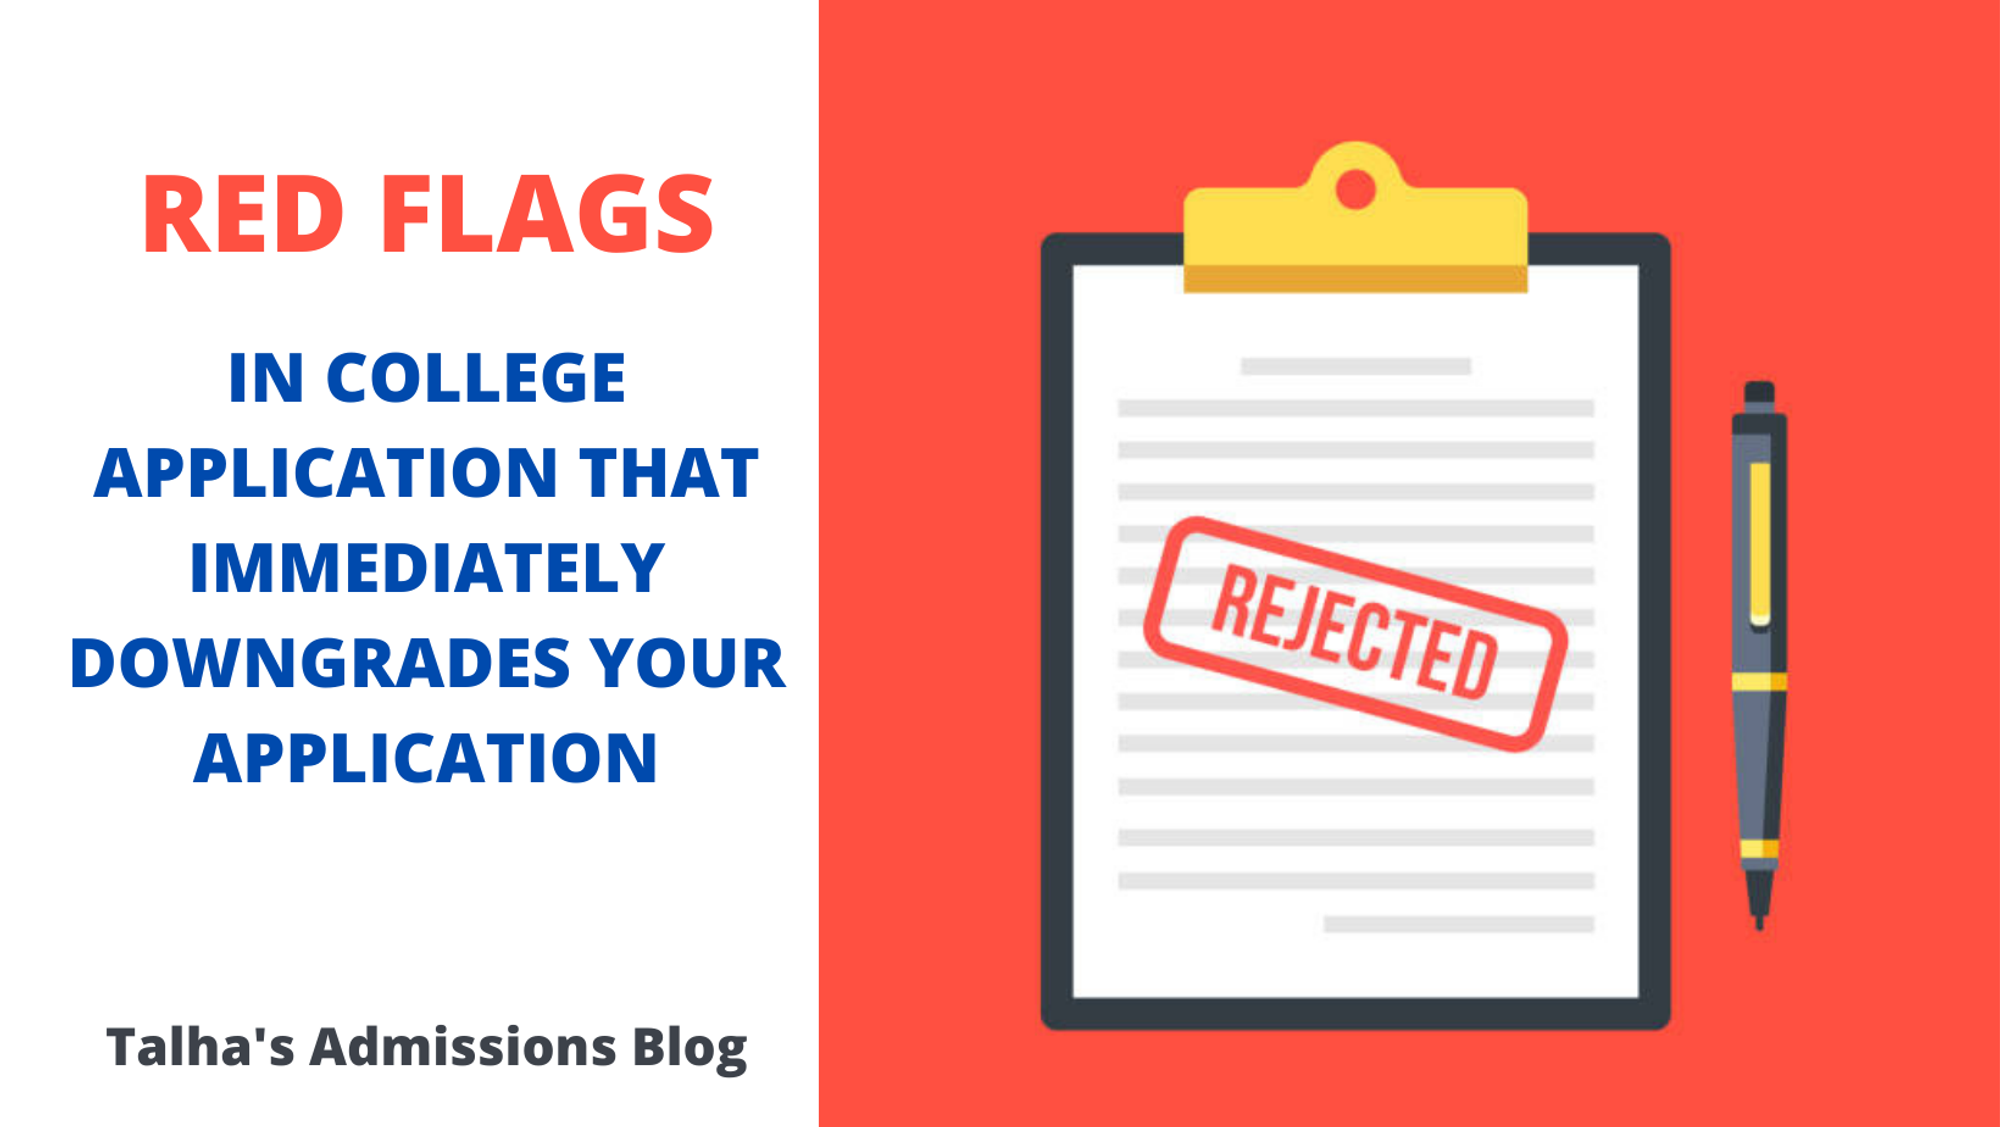 Red Flags in College Application that Immediately Downgrades your Application